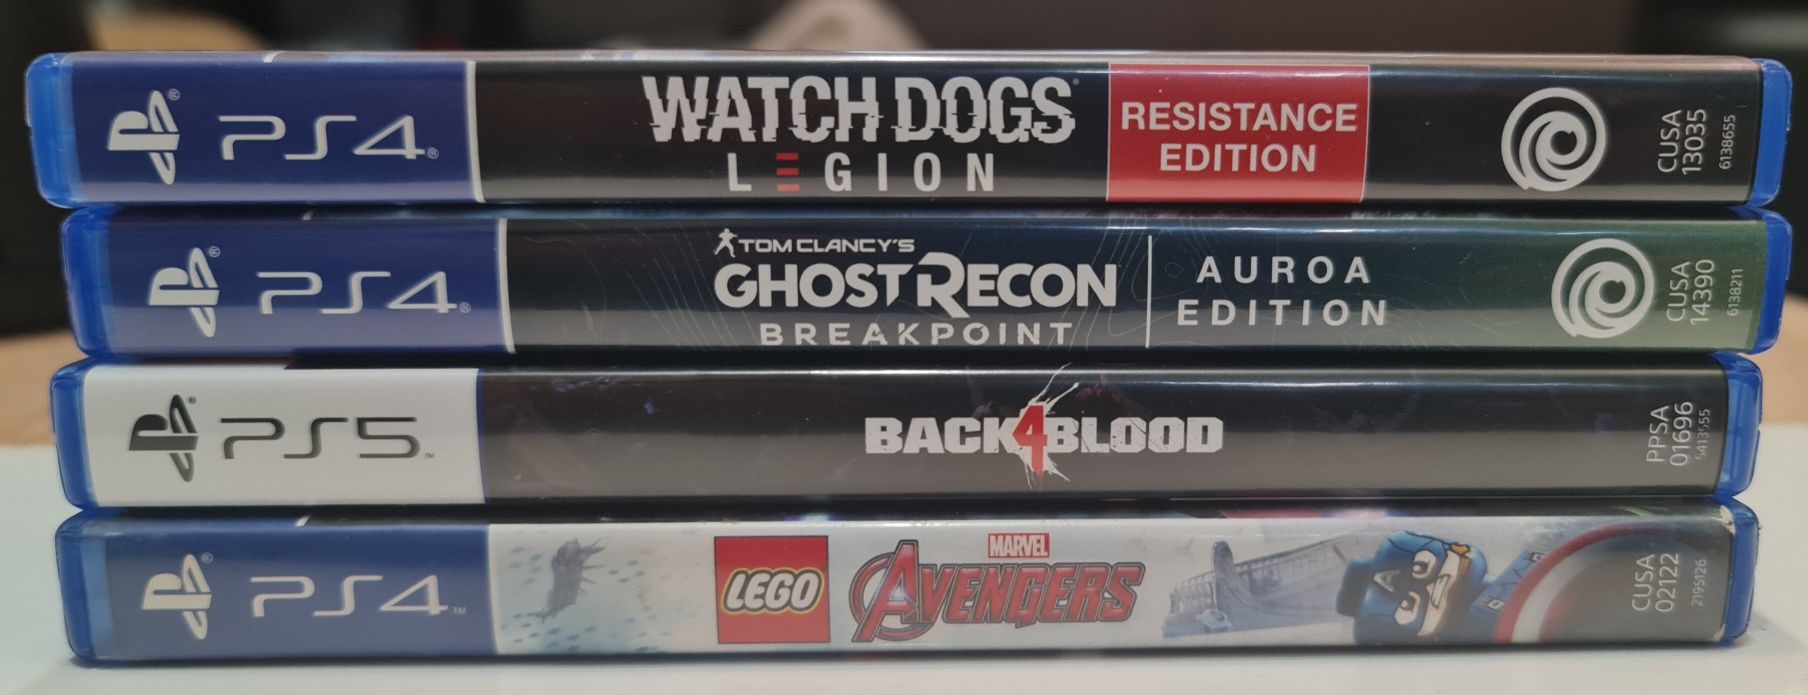 Lego Avengers, Watch Dogs Legion, Back 4 blood за PS4/PS5